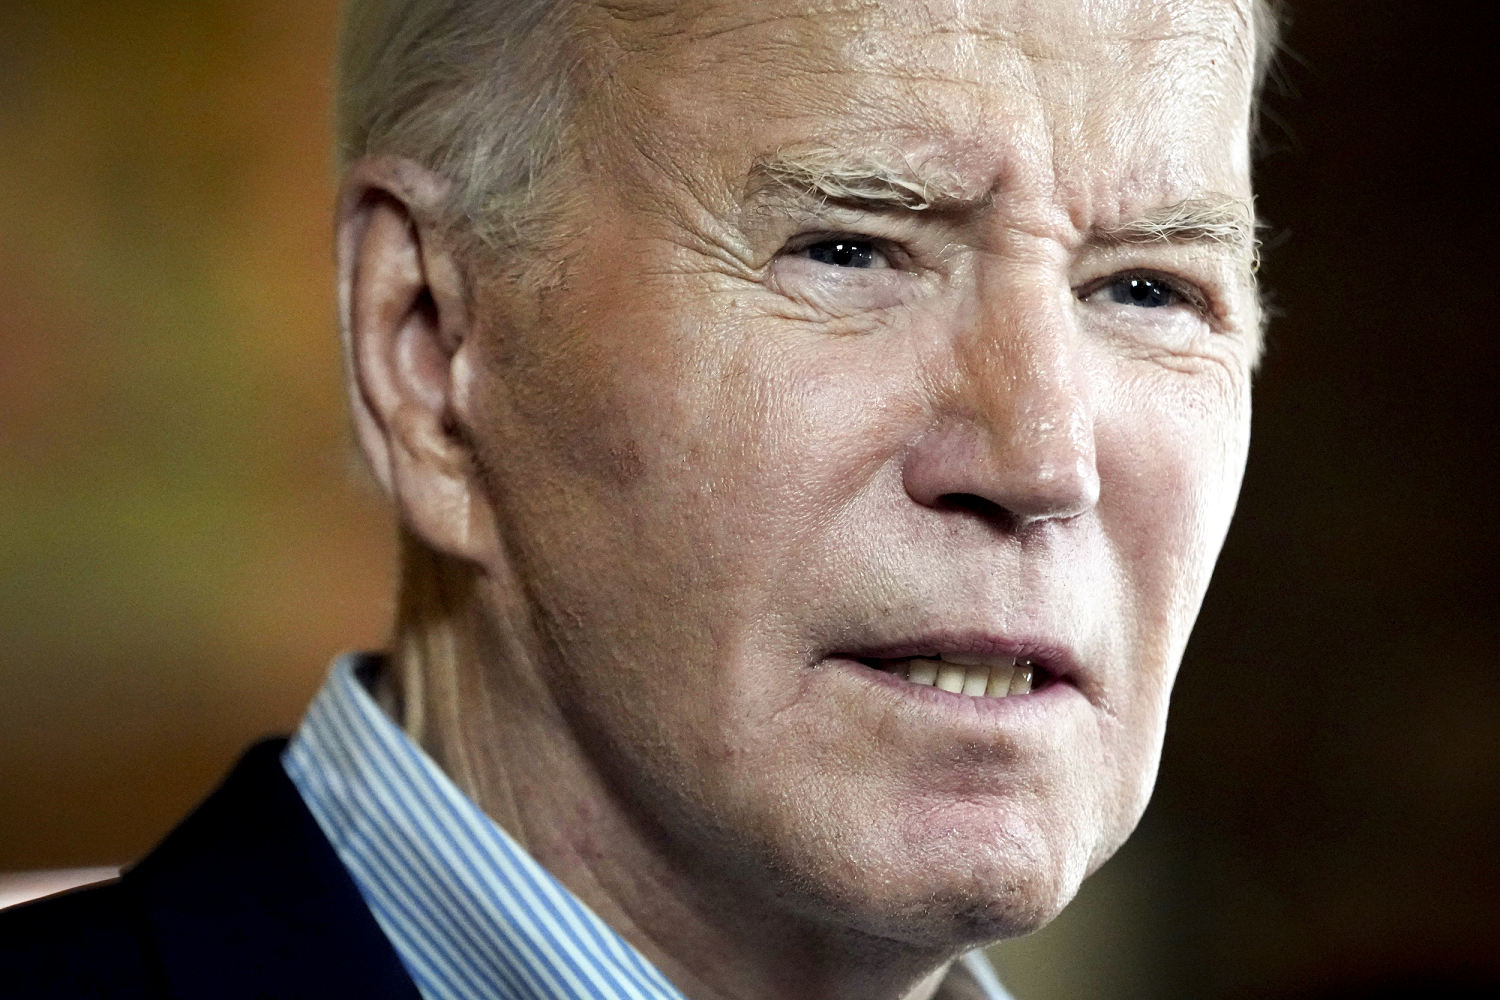 Trump’s campaign says violent imagery of Biden is nothing compared with what he faces